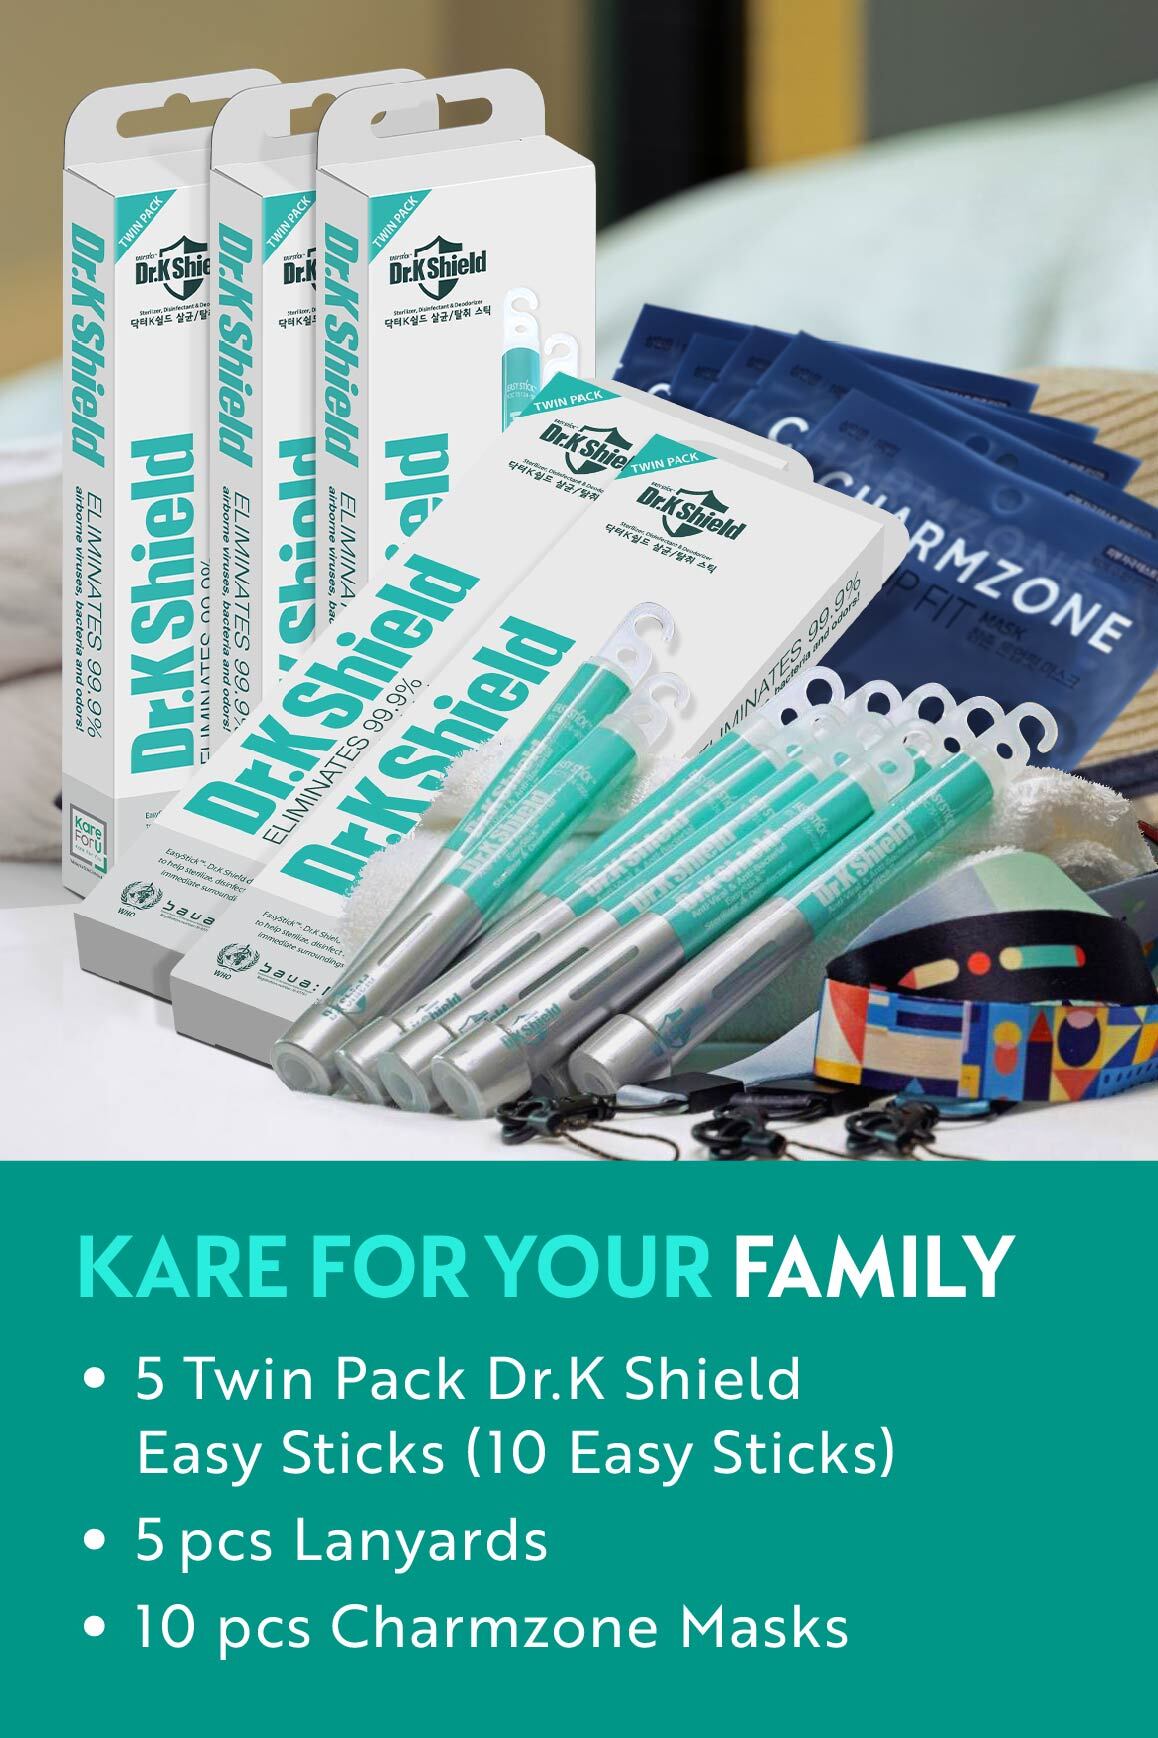 KARE FOR YOUR FAMILY - Twin Pack Dr.K Shield Easy Sticks